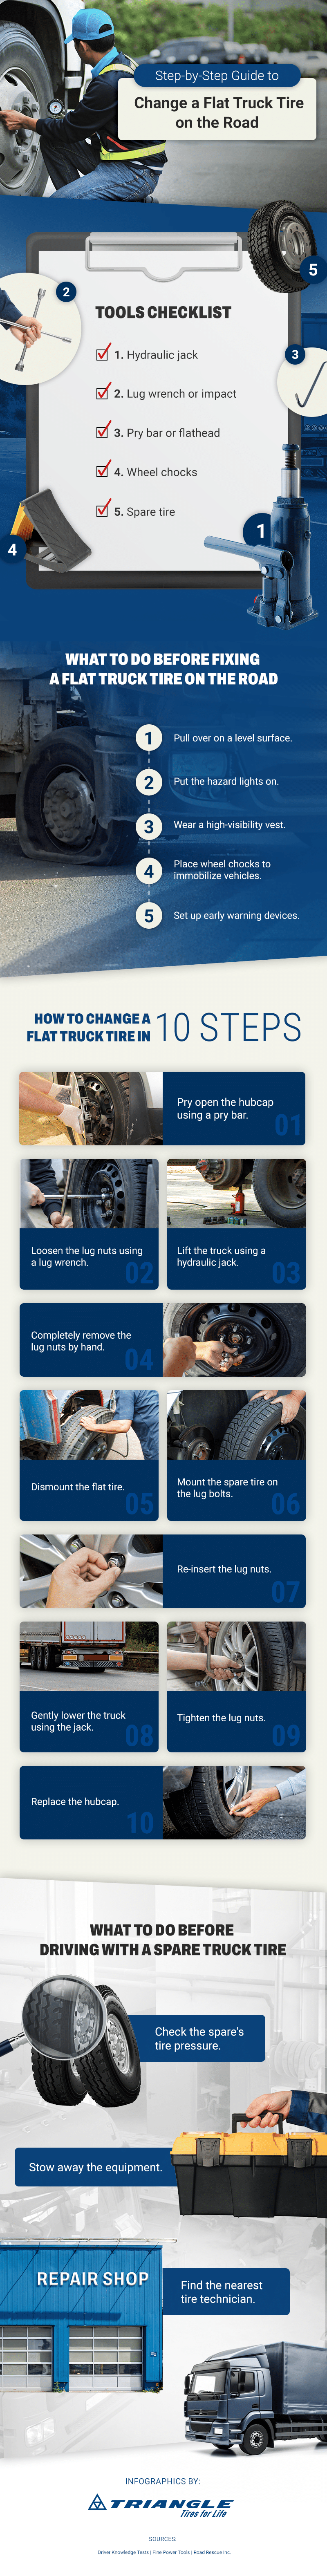 how to change a flat truck tire on the road infographic